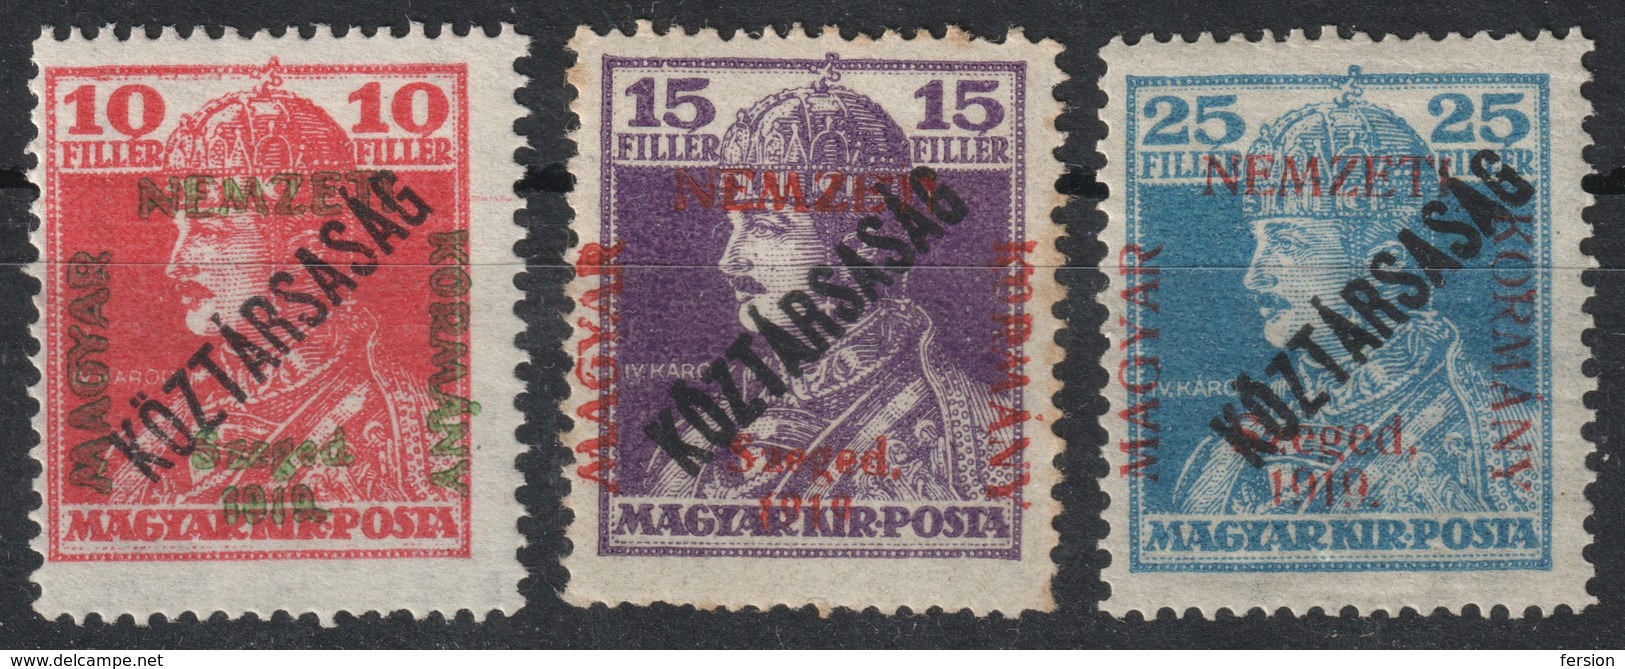 1919 France Occupation Local SZEGED - Hungary - KING Emperor Karl Charles Overprint - MNH LOT - Neufs